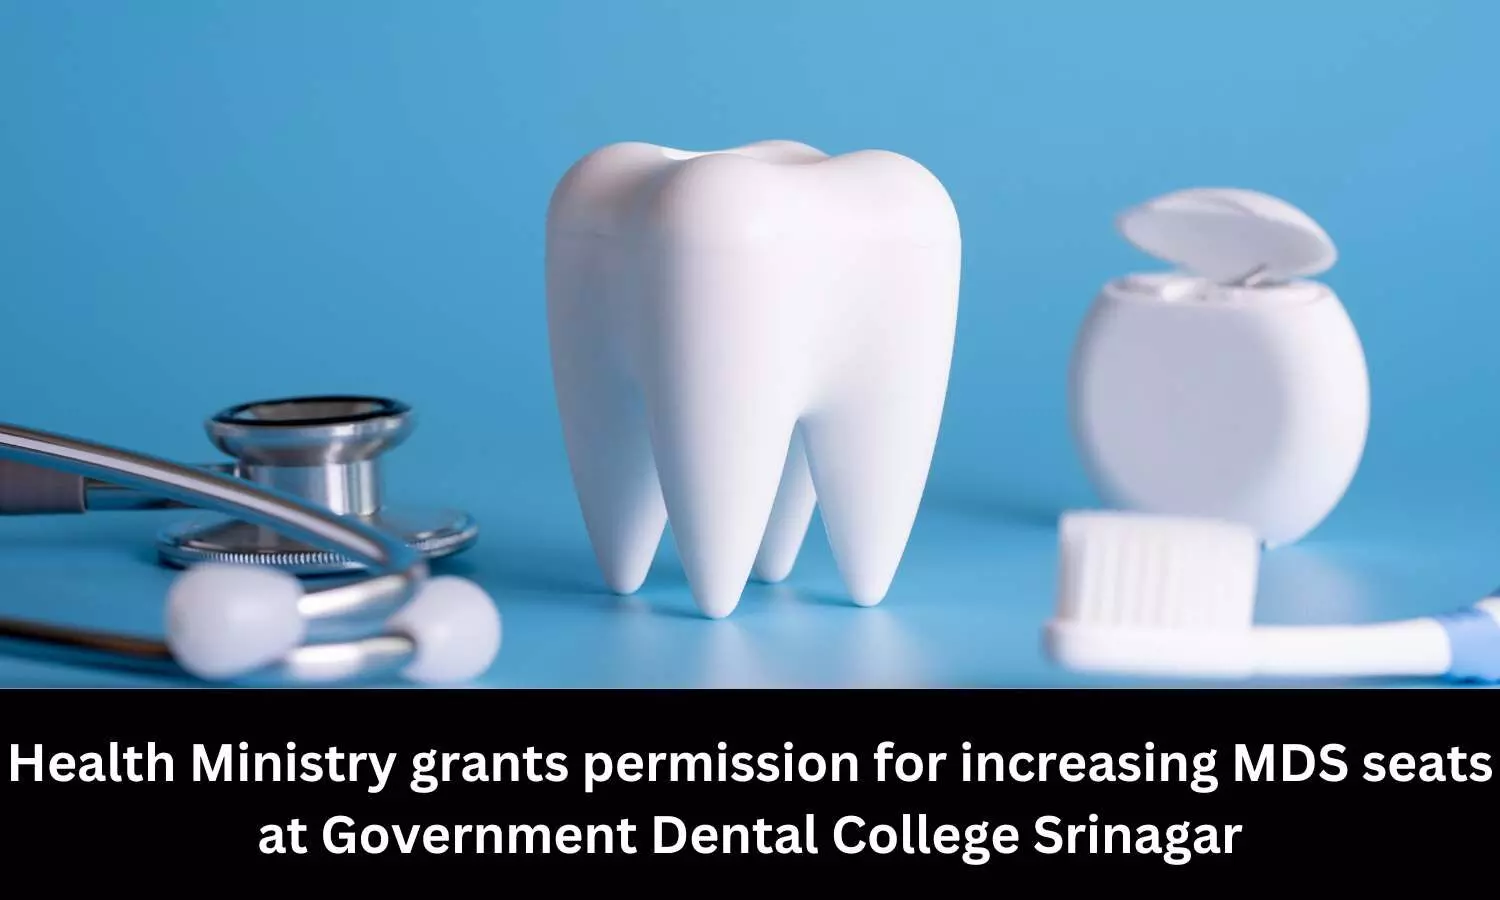 Centre gives permission to increase MDS seats at Government Dental College Srinagar